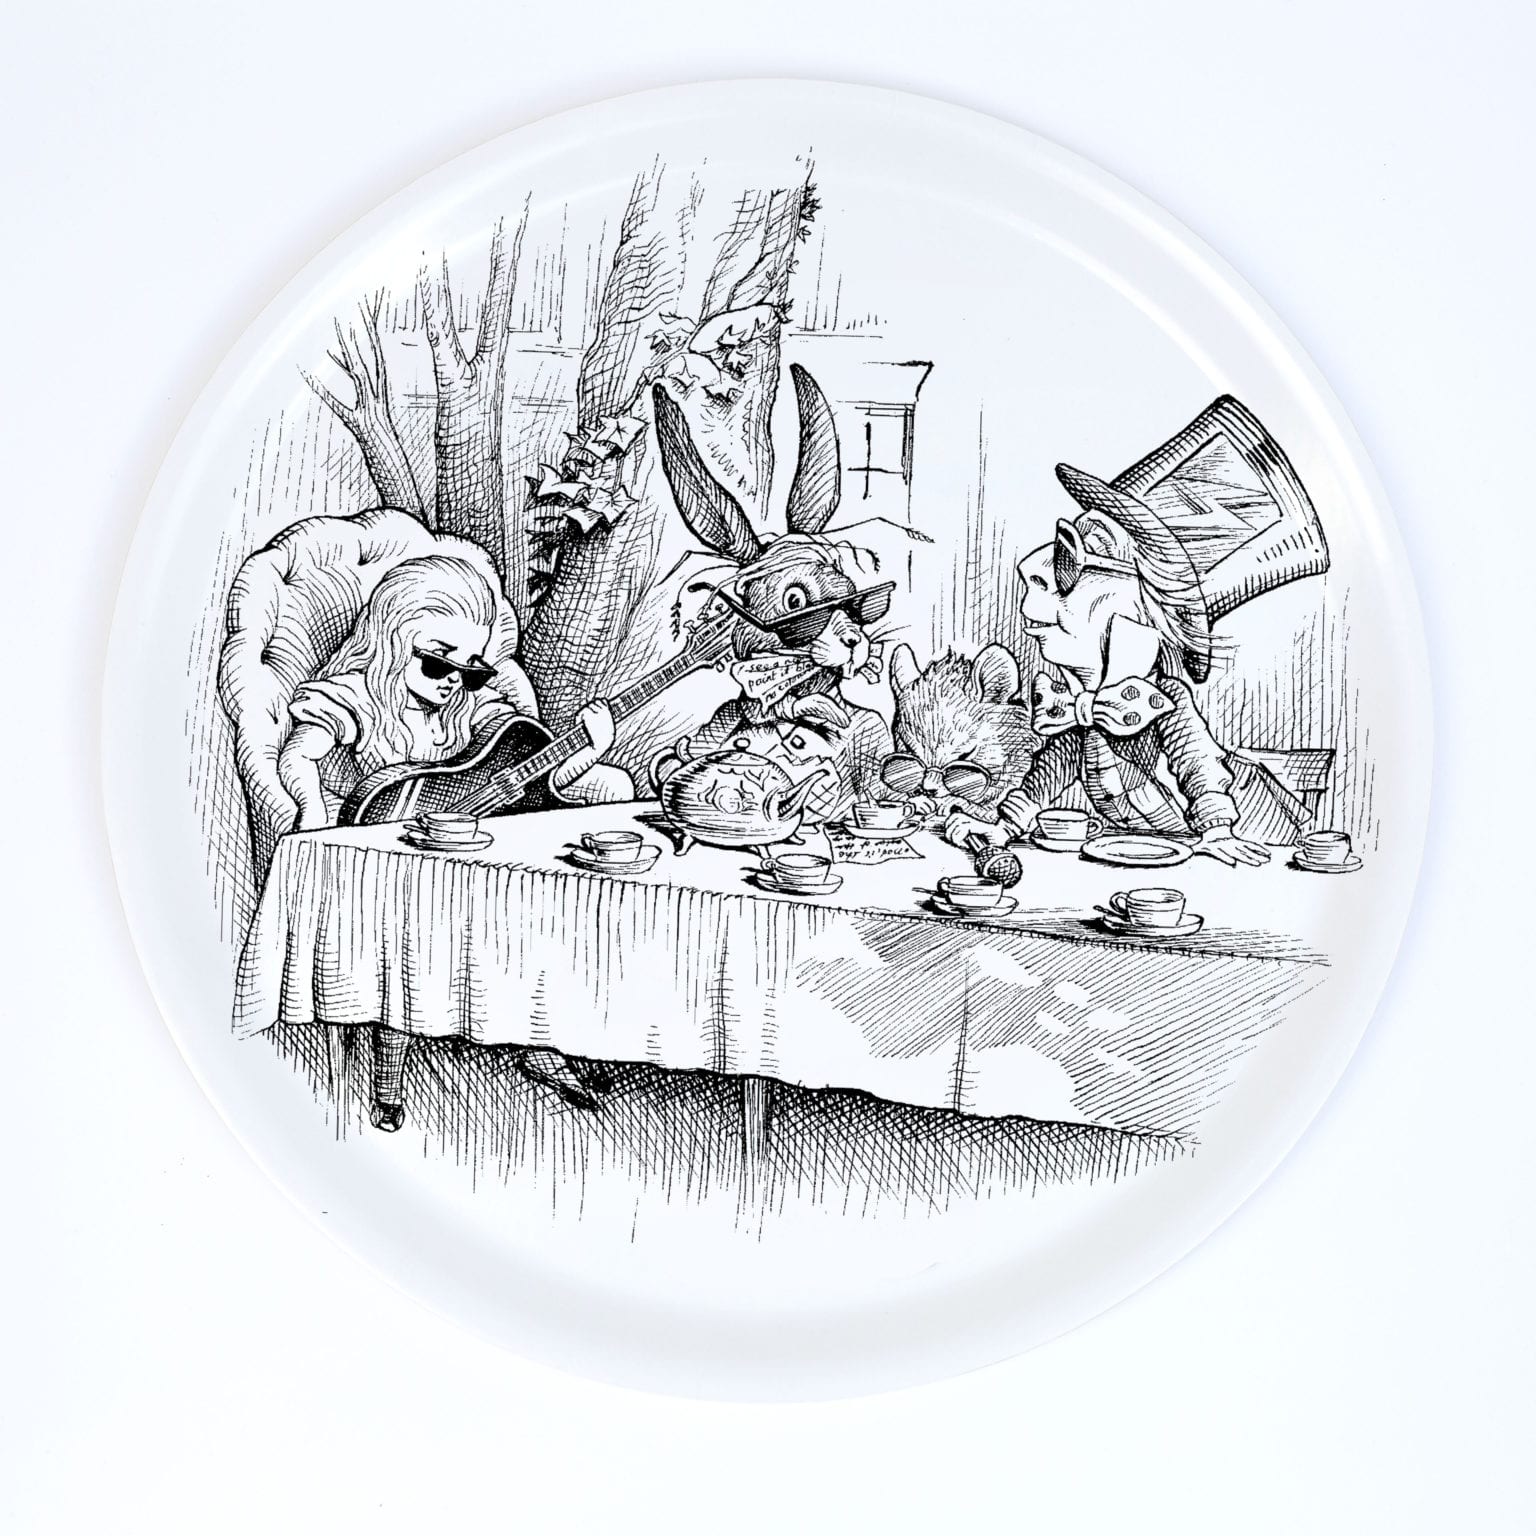 A modern version of the Mad Hatter's Tea Party, decorating a plate.